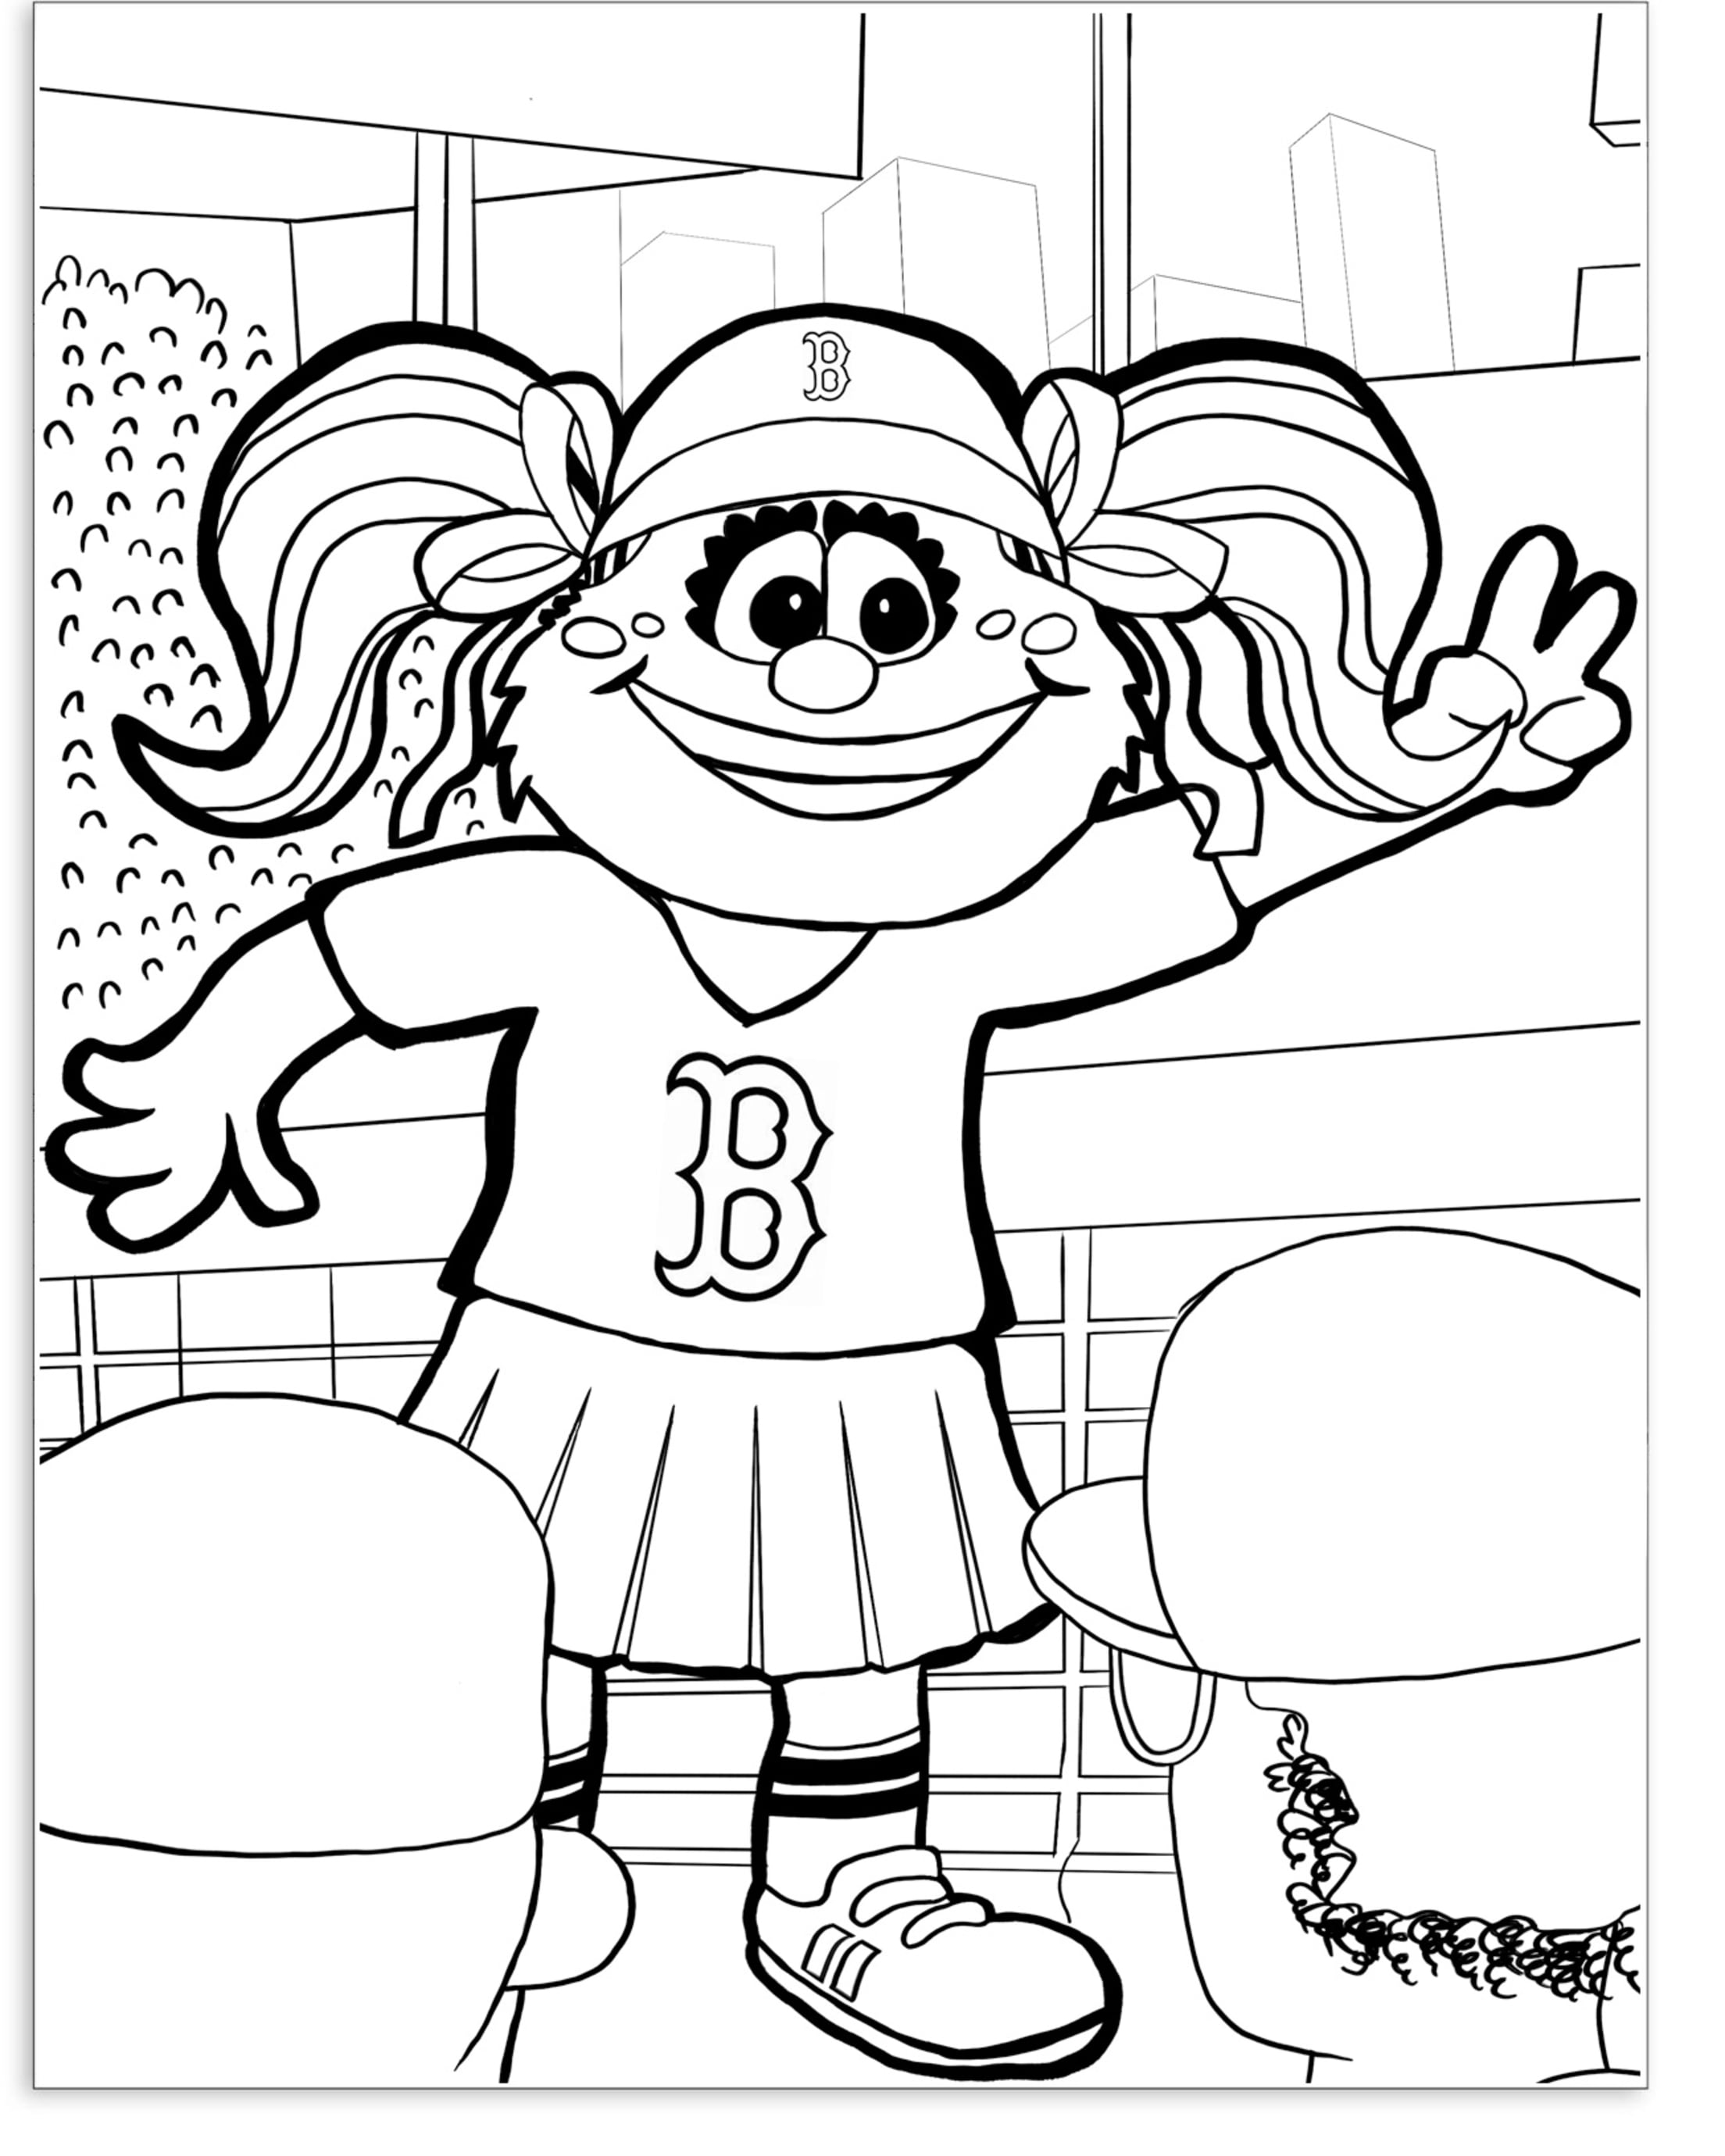 boston red sox mascot coloring pages